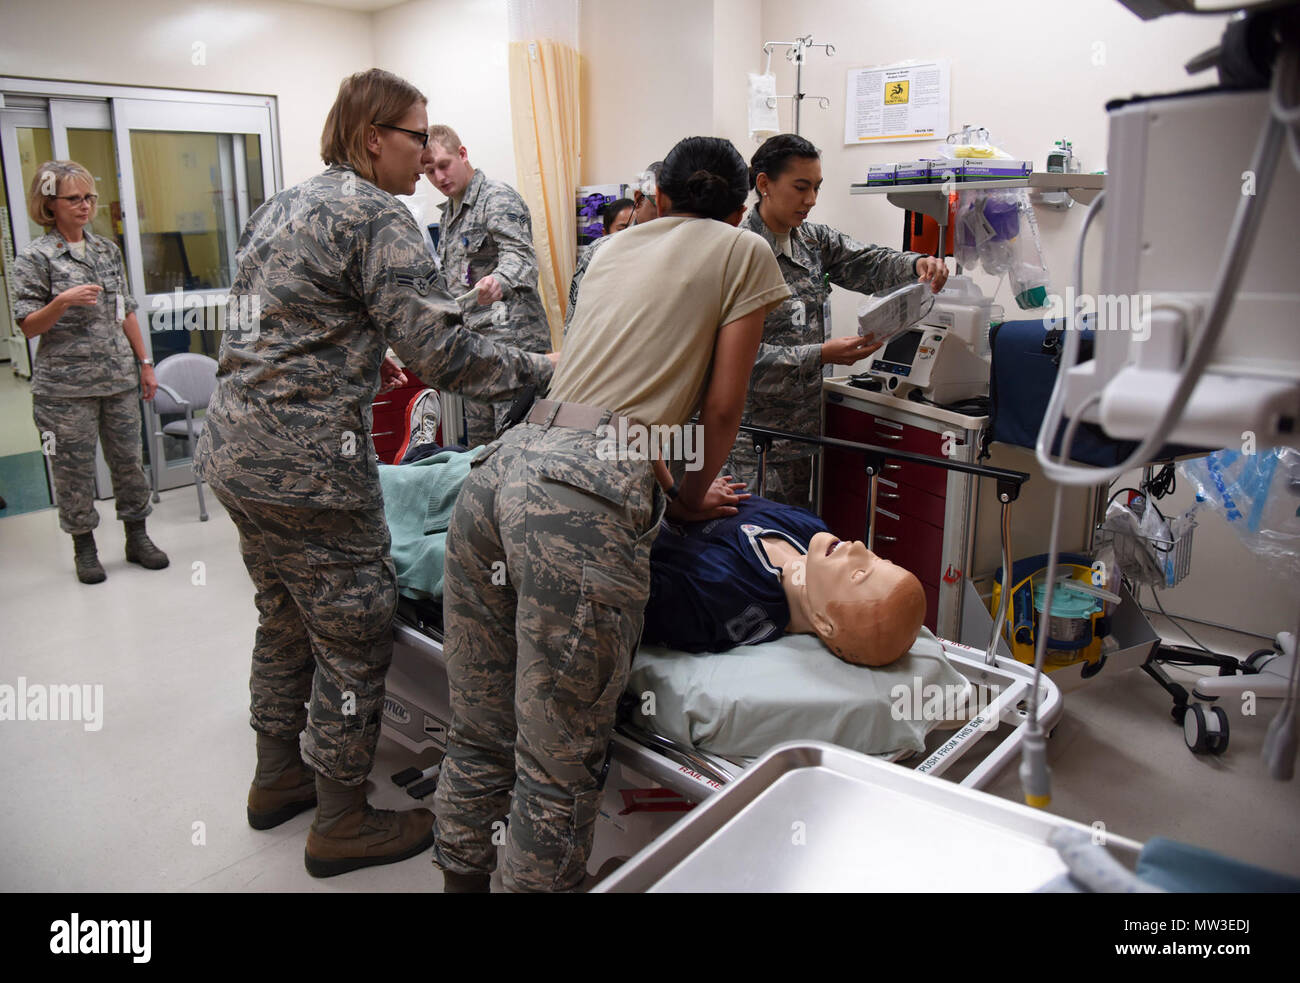 Members of the 81st Medical Operations Squadron participate in a medical emergency scenario during Code Blue Thursday in the Keesler Medical Center emergency room April 27, 2017, on Keesler Air Force Base, Miss. Emergency room staff members coordinated with the simulation lab to use human patient simulators for running various advanced cardiac life support scenarios to improve Keesler’s new medical technicians’ skills and get them familiar with emergency equipment. Stock Photo